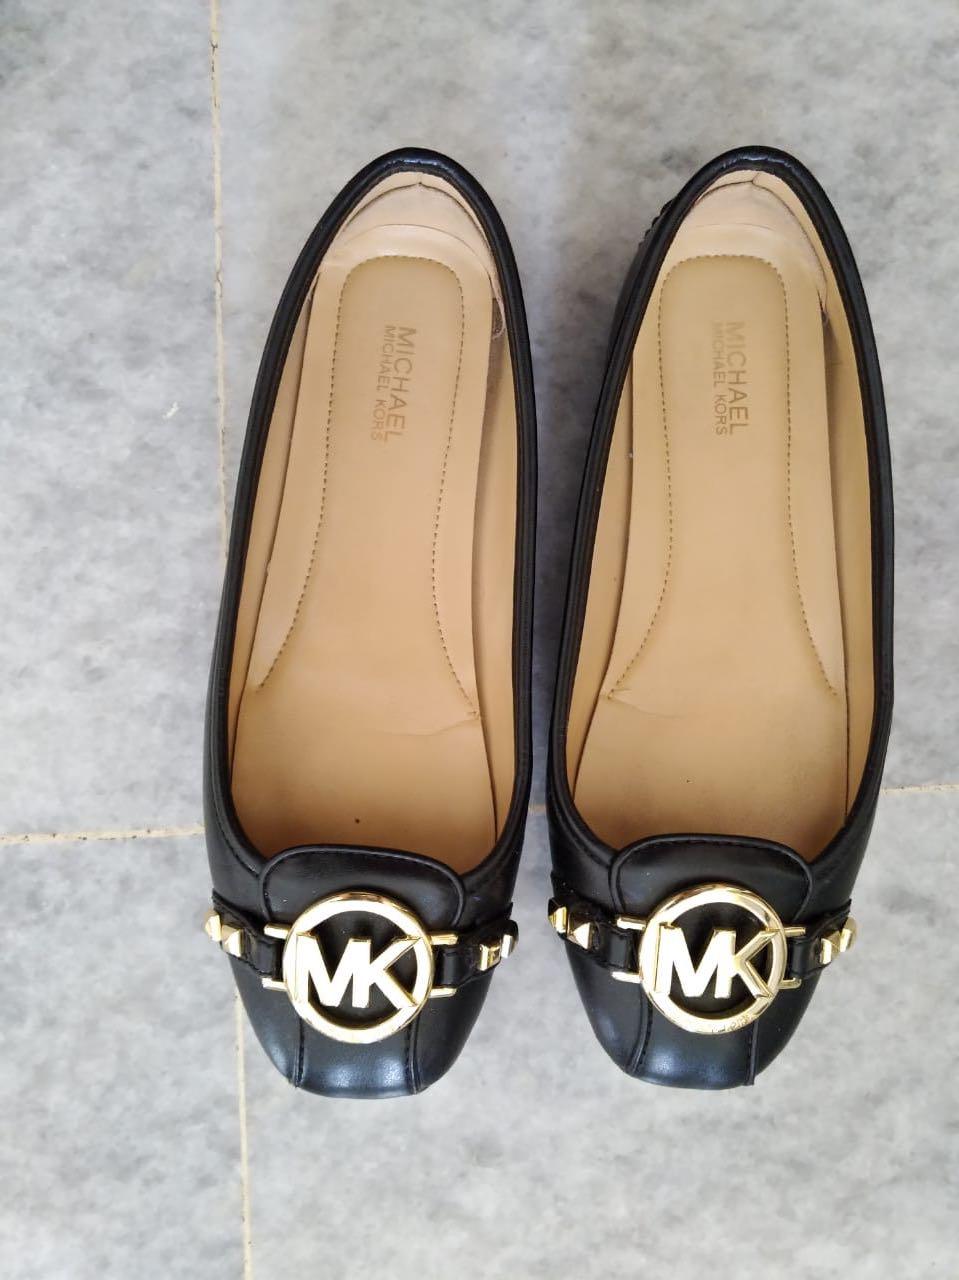 Oceania Grand delusion Contradiction Original Michael Kors Shoes black color MK Flat shoes, Women's Fashion,  Footwear, Flats on Carousell